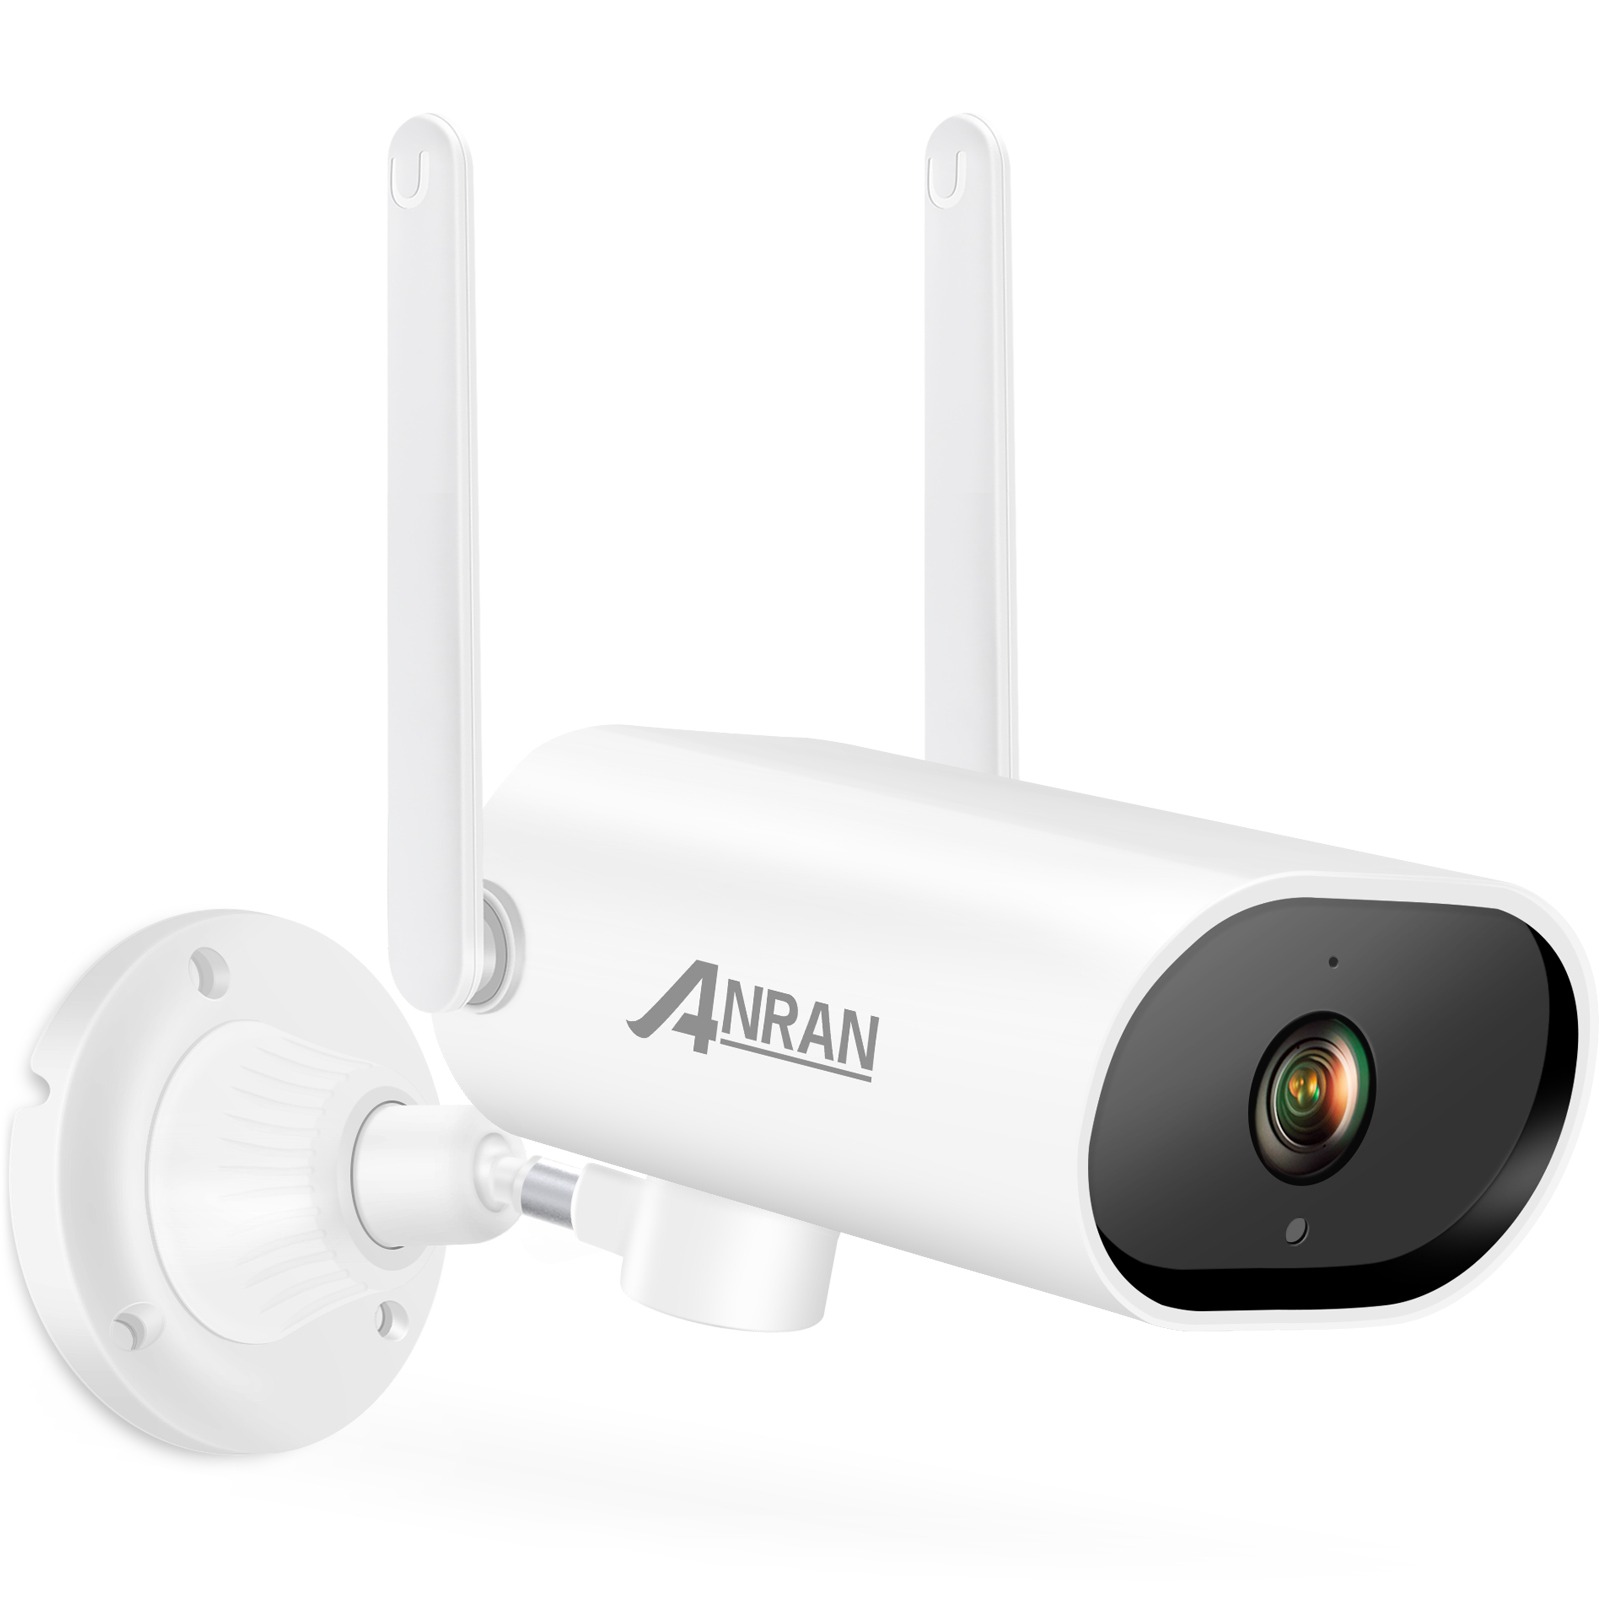 Anran CCTV Problems : 5 Common Issues (Explained) - Consort Design